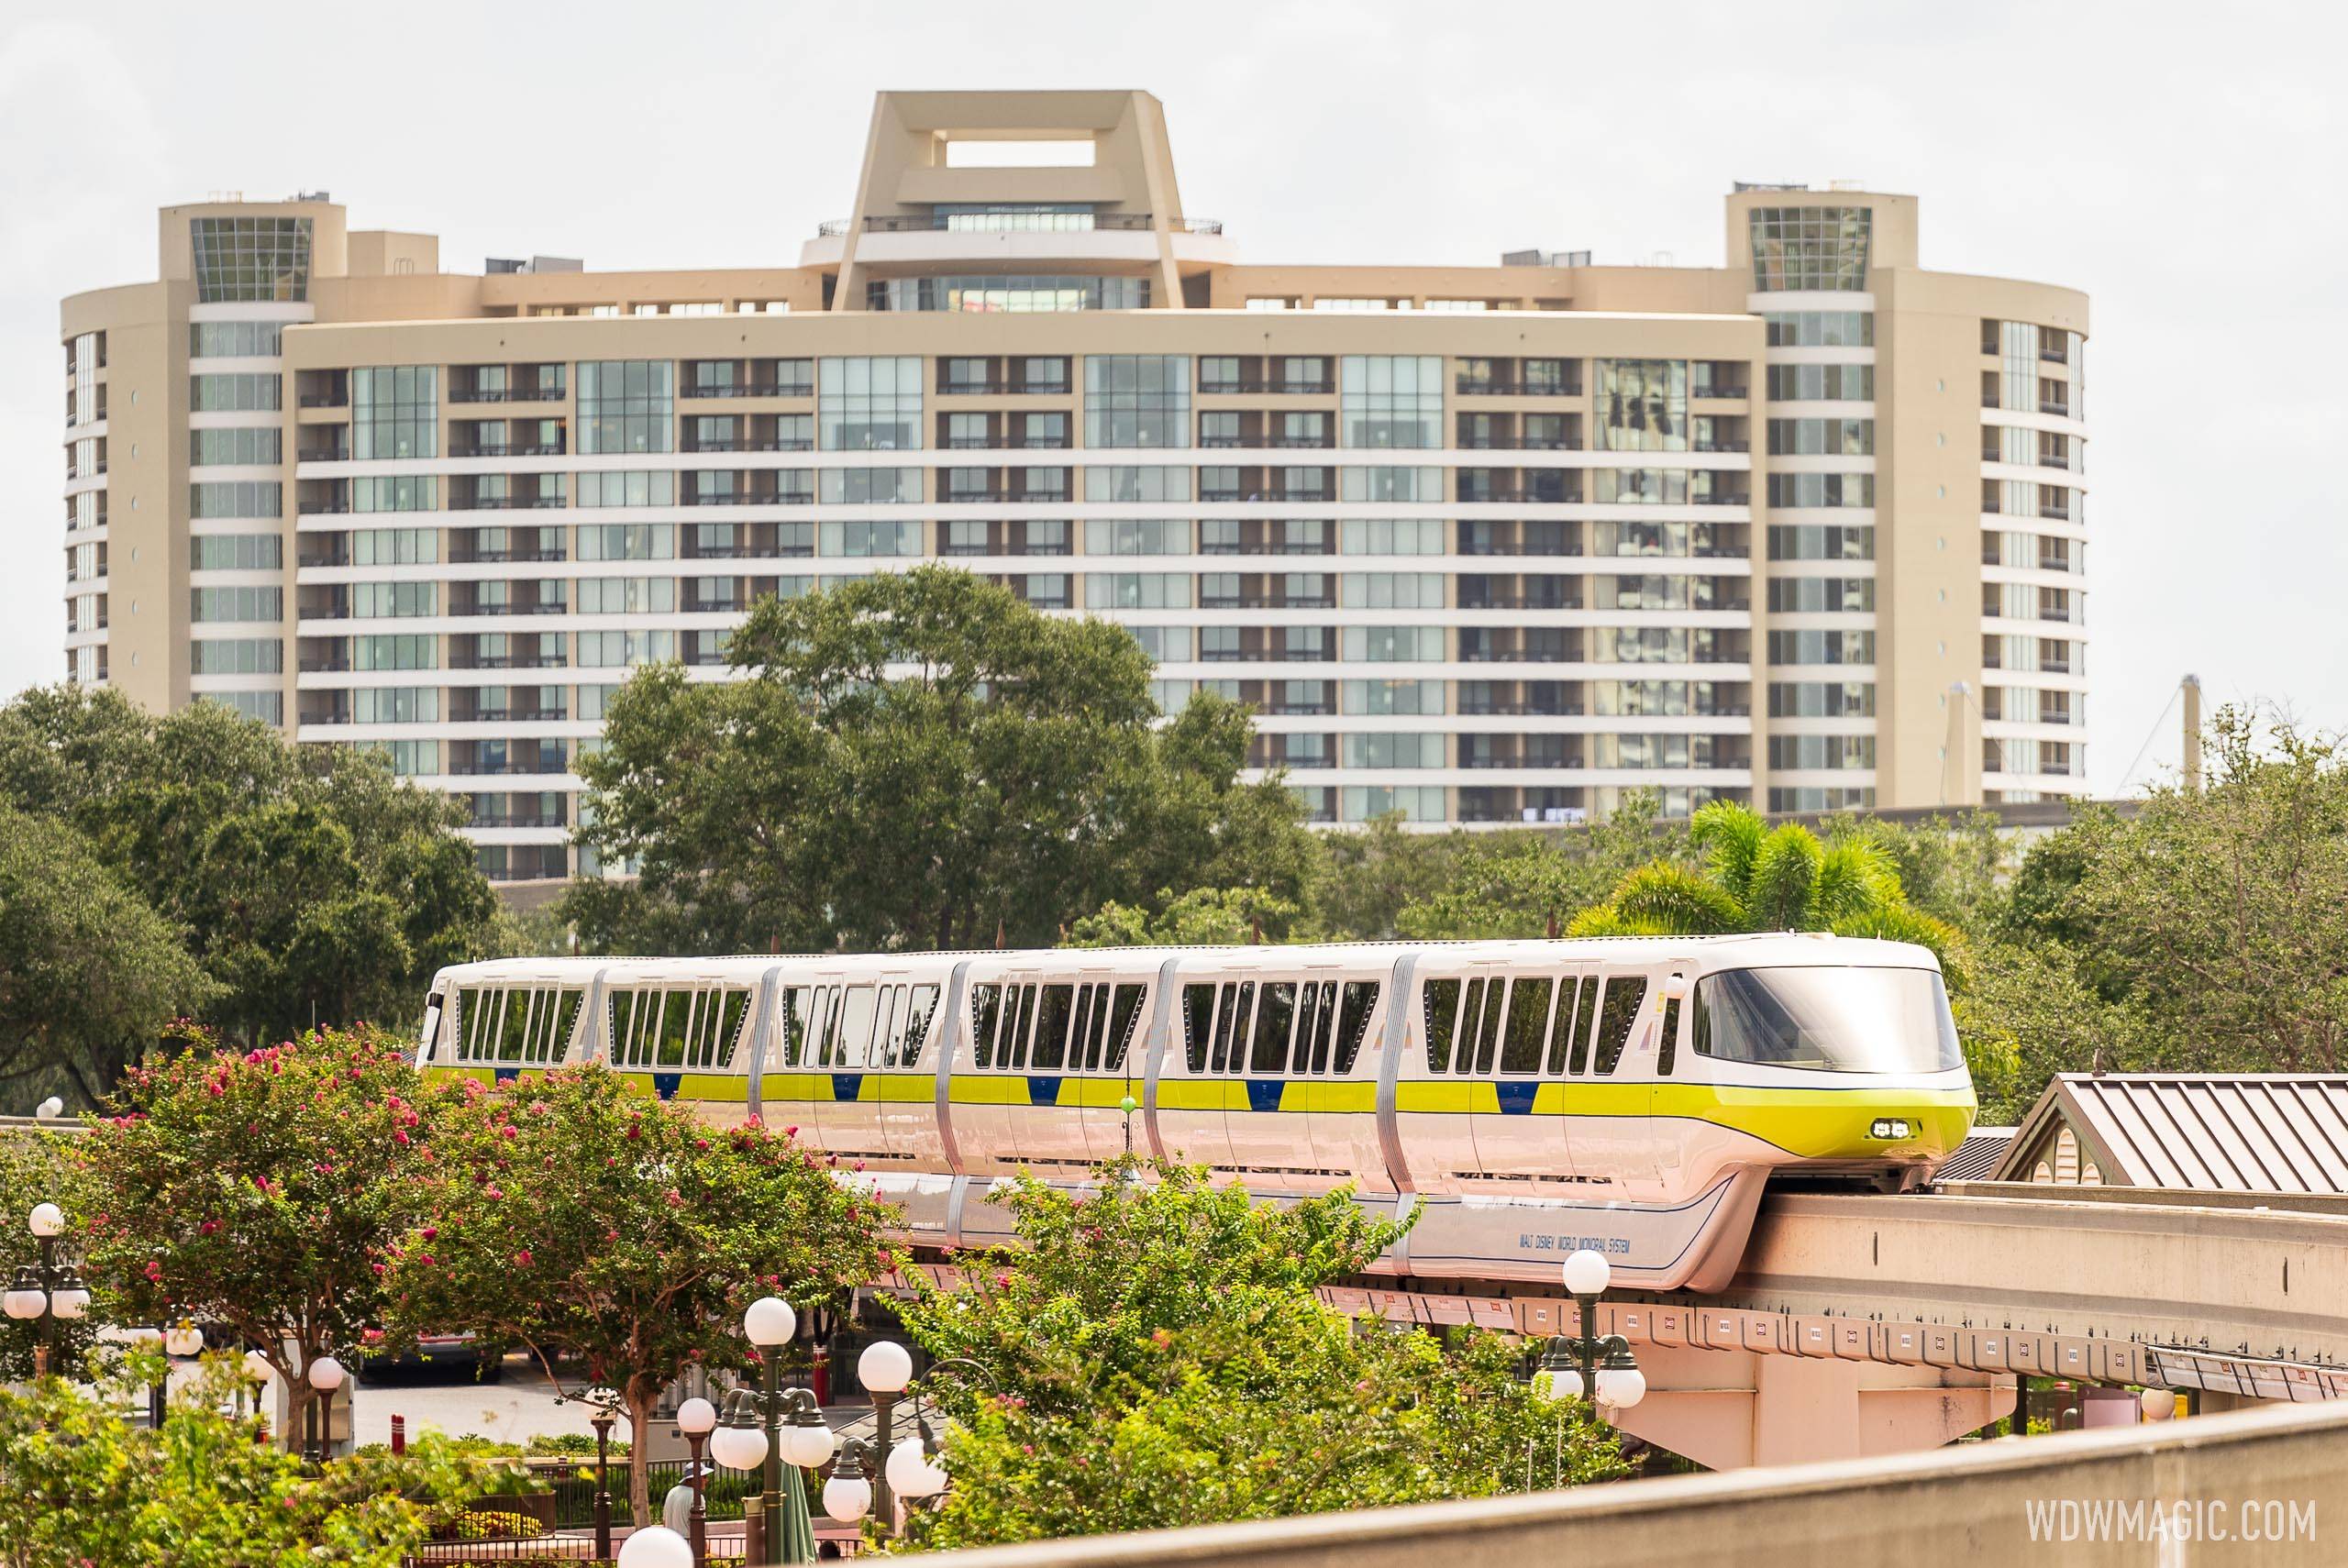 Normal monorail service has resumed after a delayed opening today